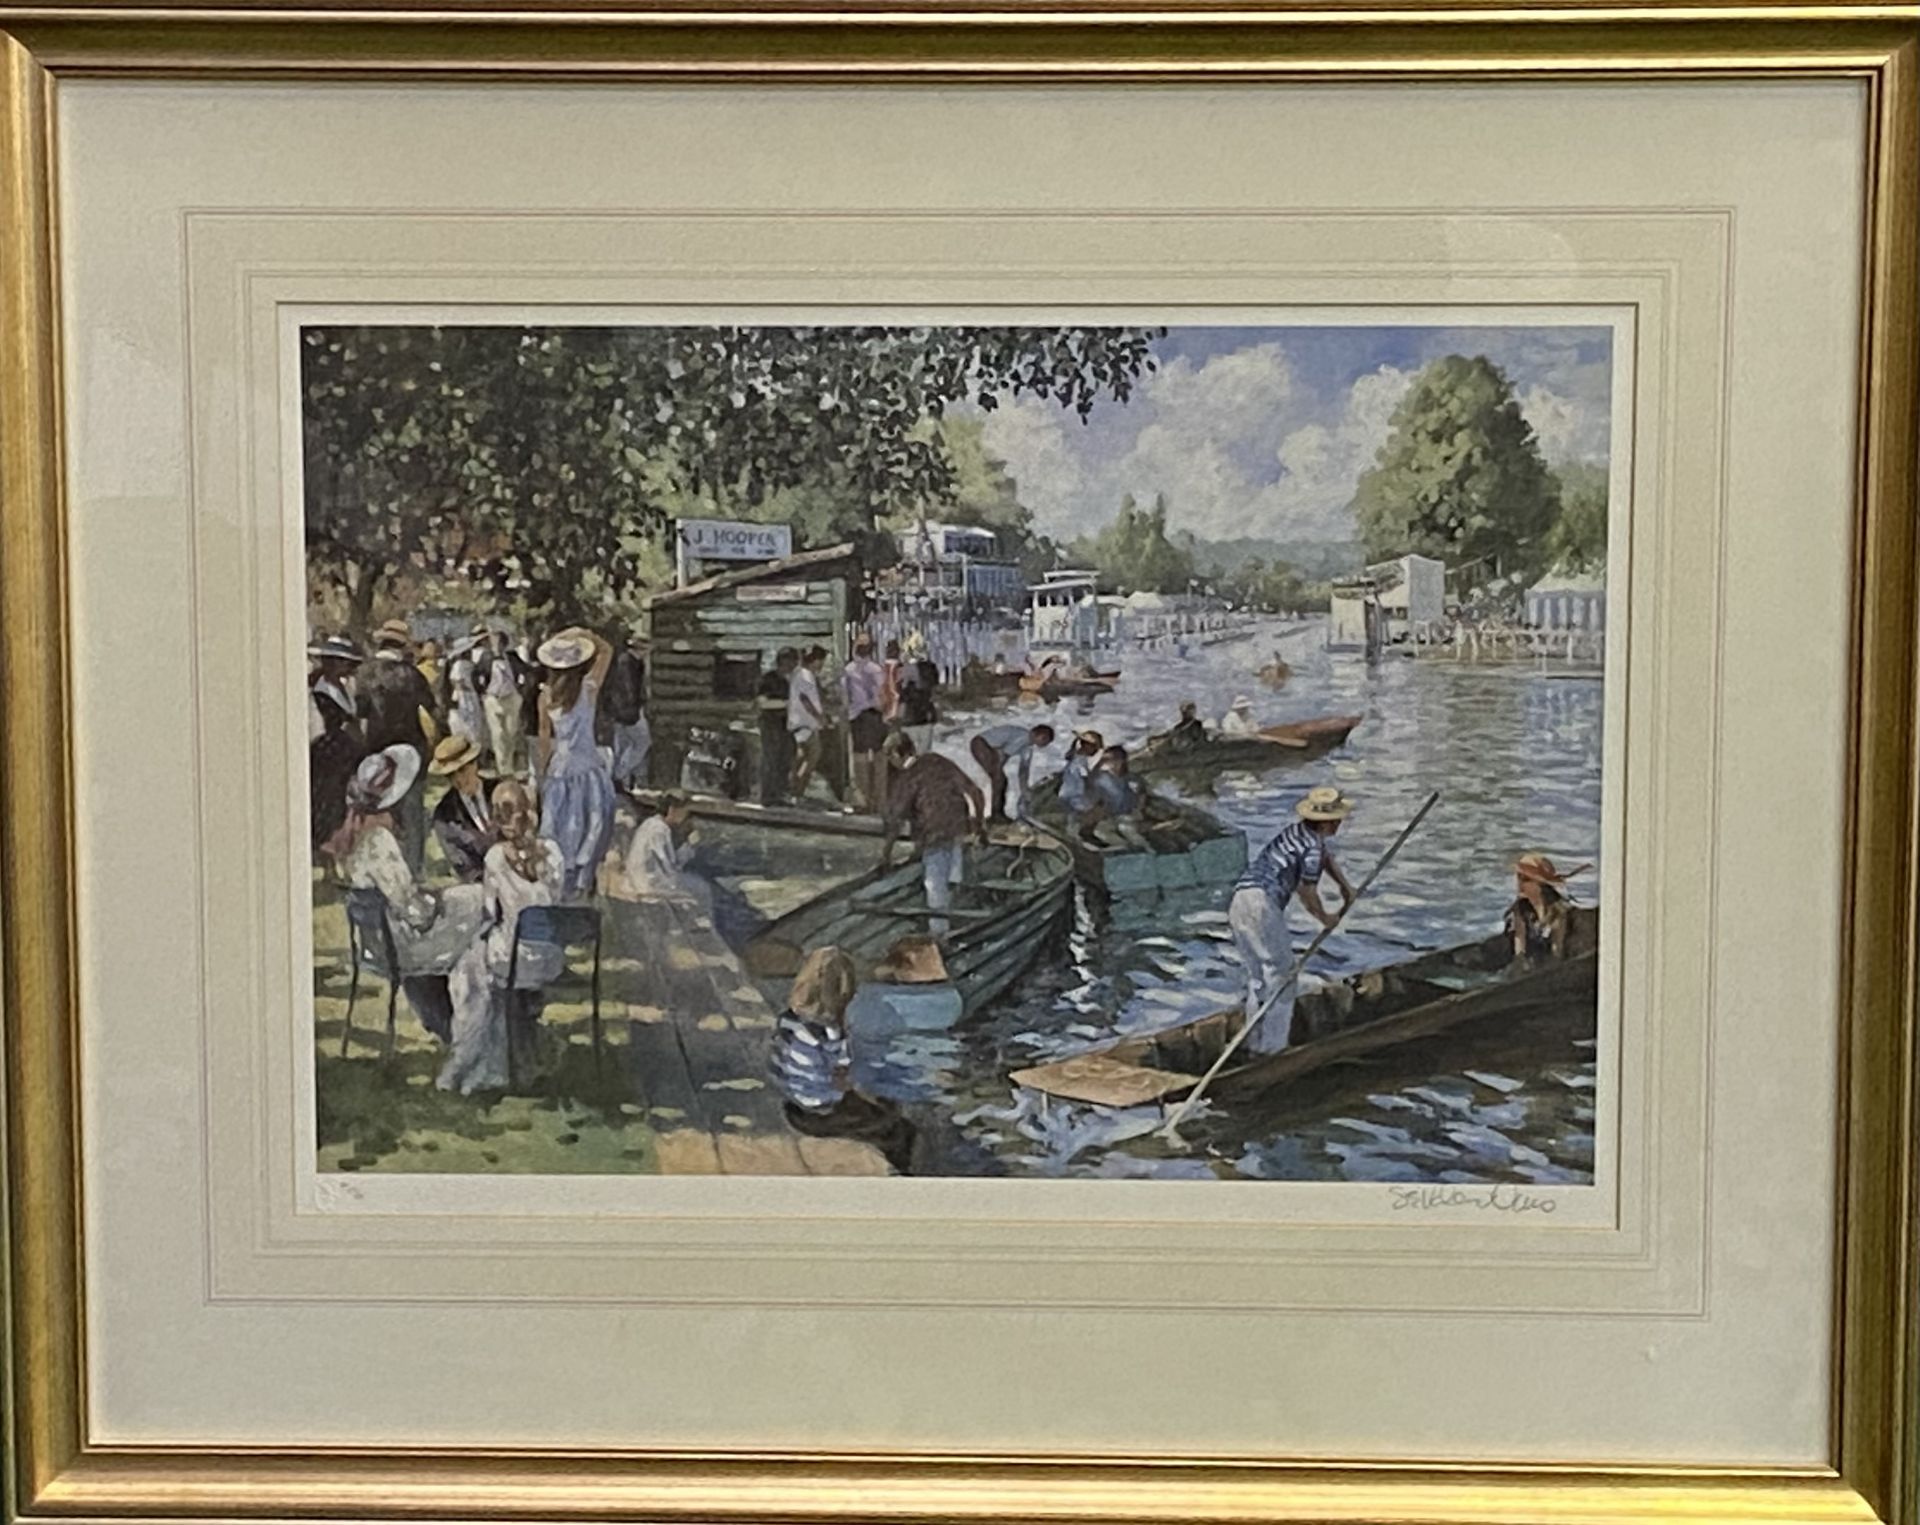 Framed and glazed artist proof limited edition print 47/50, of Henley Royal Regatta